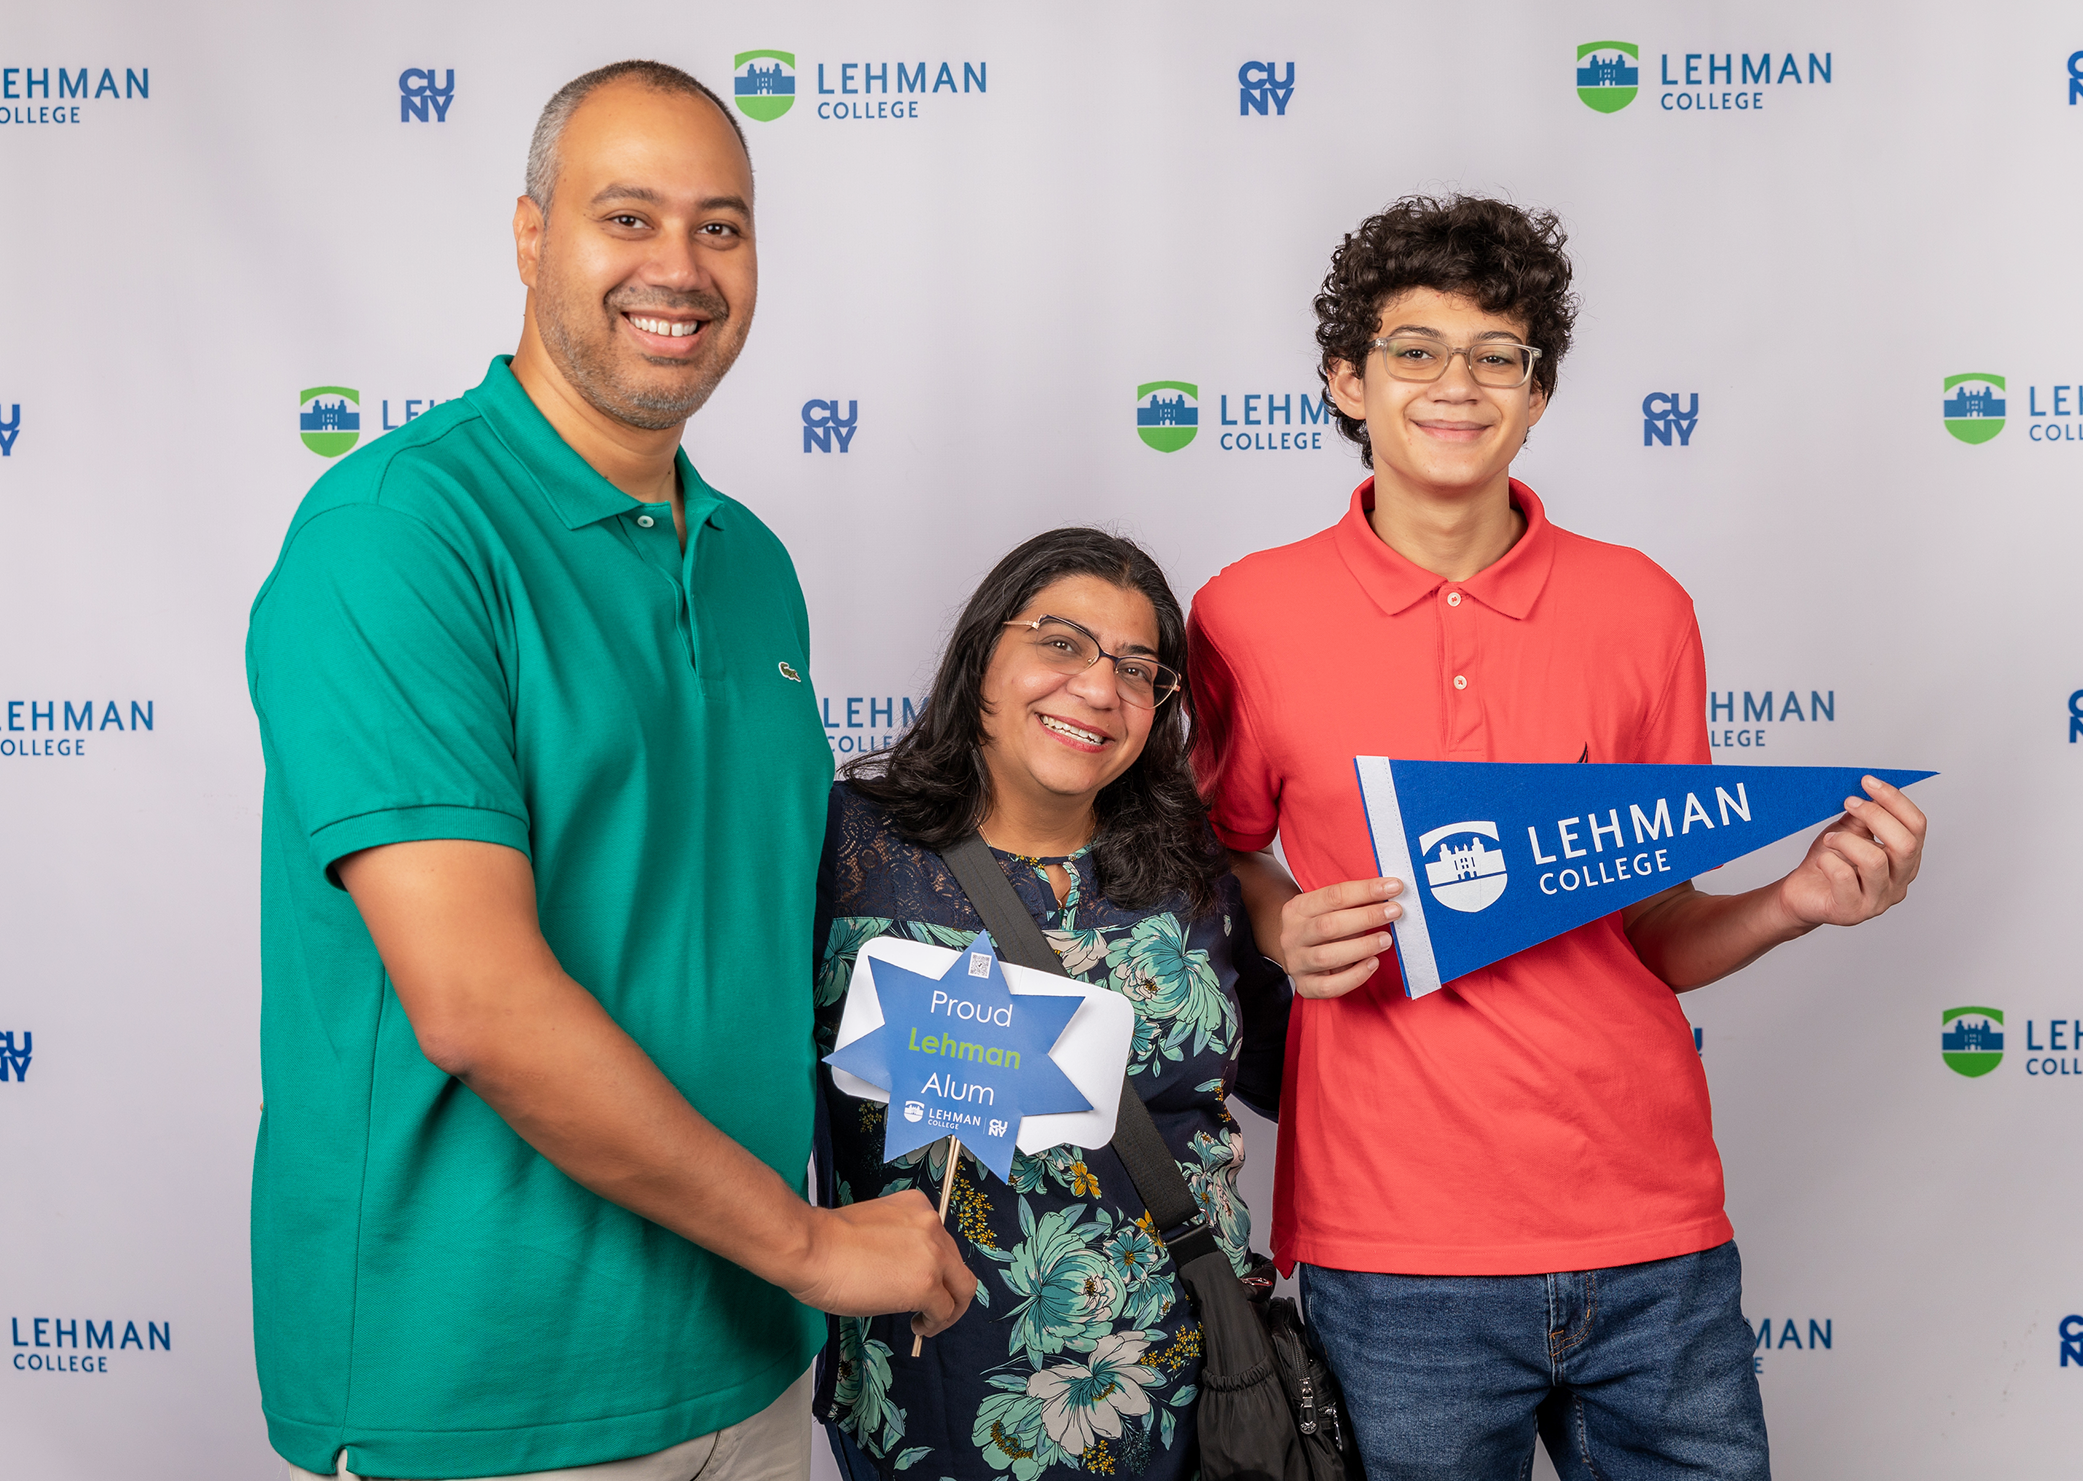 Photo of the Week: Gavino Gonzalez '02 and Denise Cruz B.A. '02, M.A. '05 met at Lehman. Their son Gavino–a prospective future alum–attended the Admissions Open House this fall.